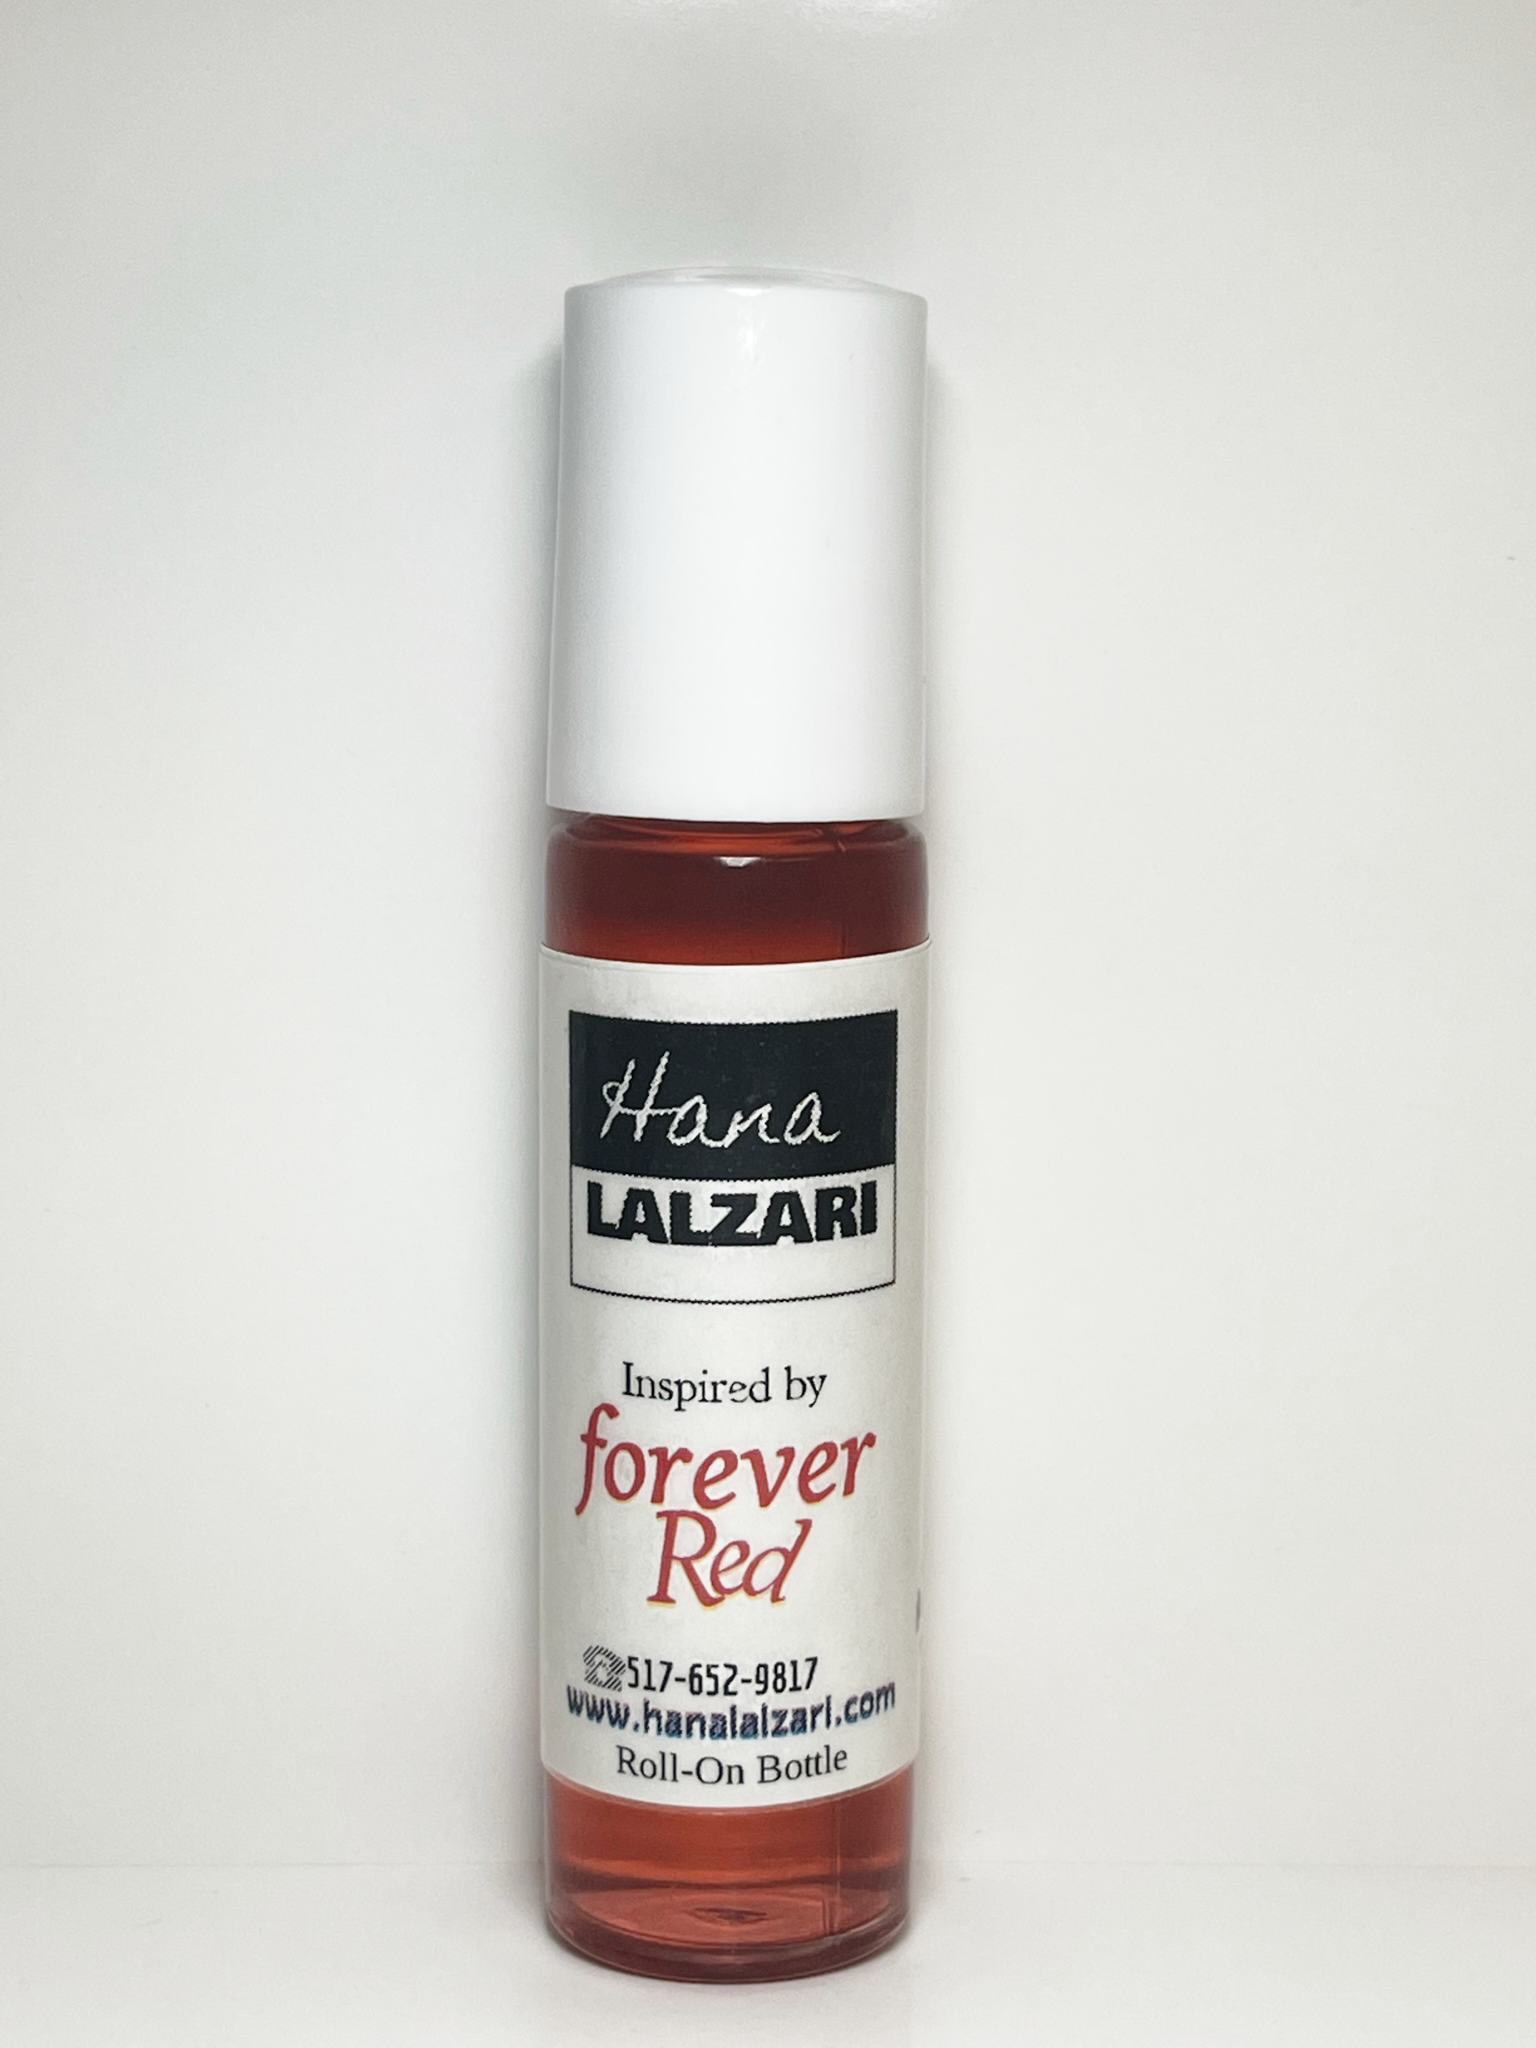 Luxuriously Inspired by Forever Red